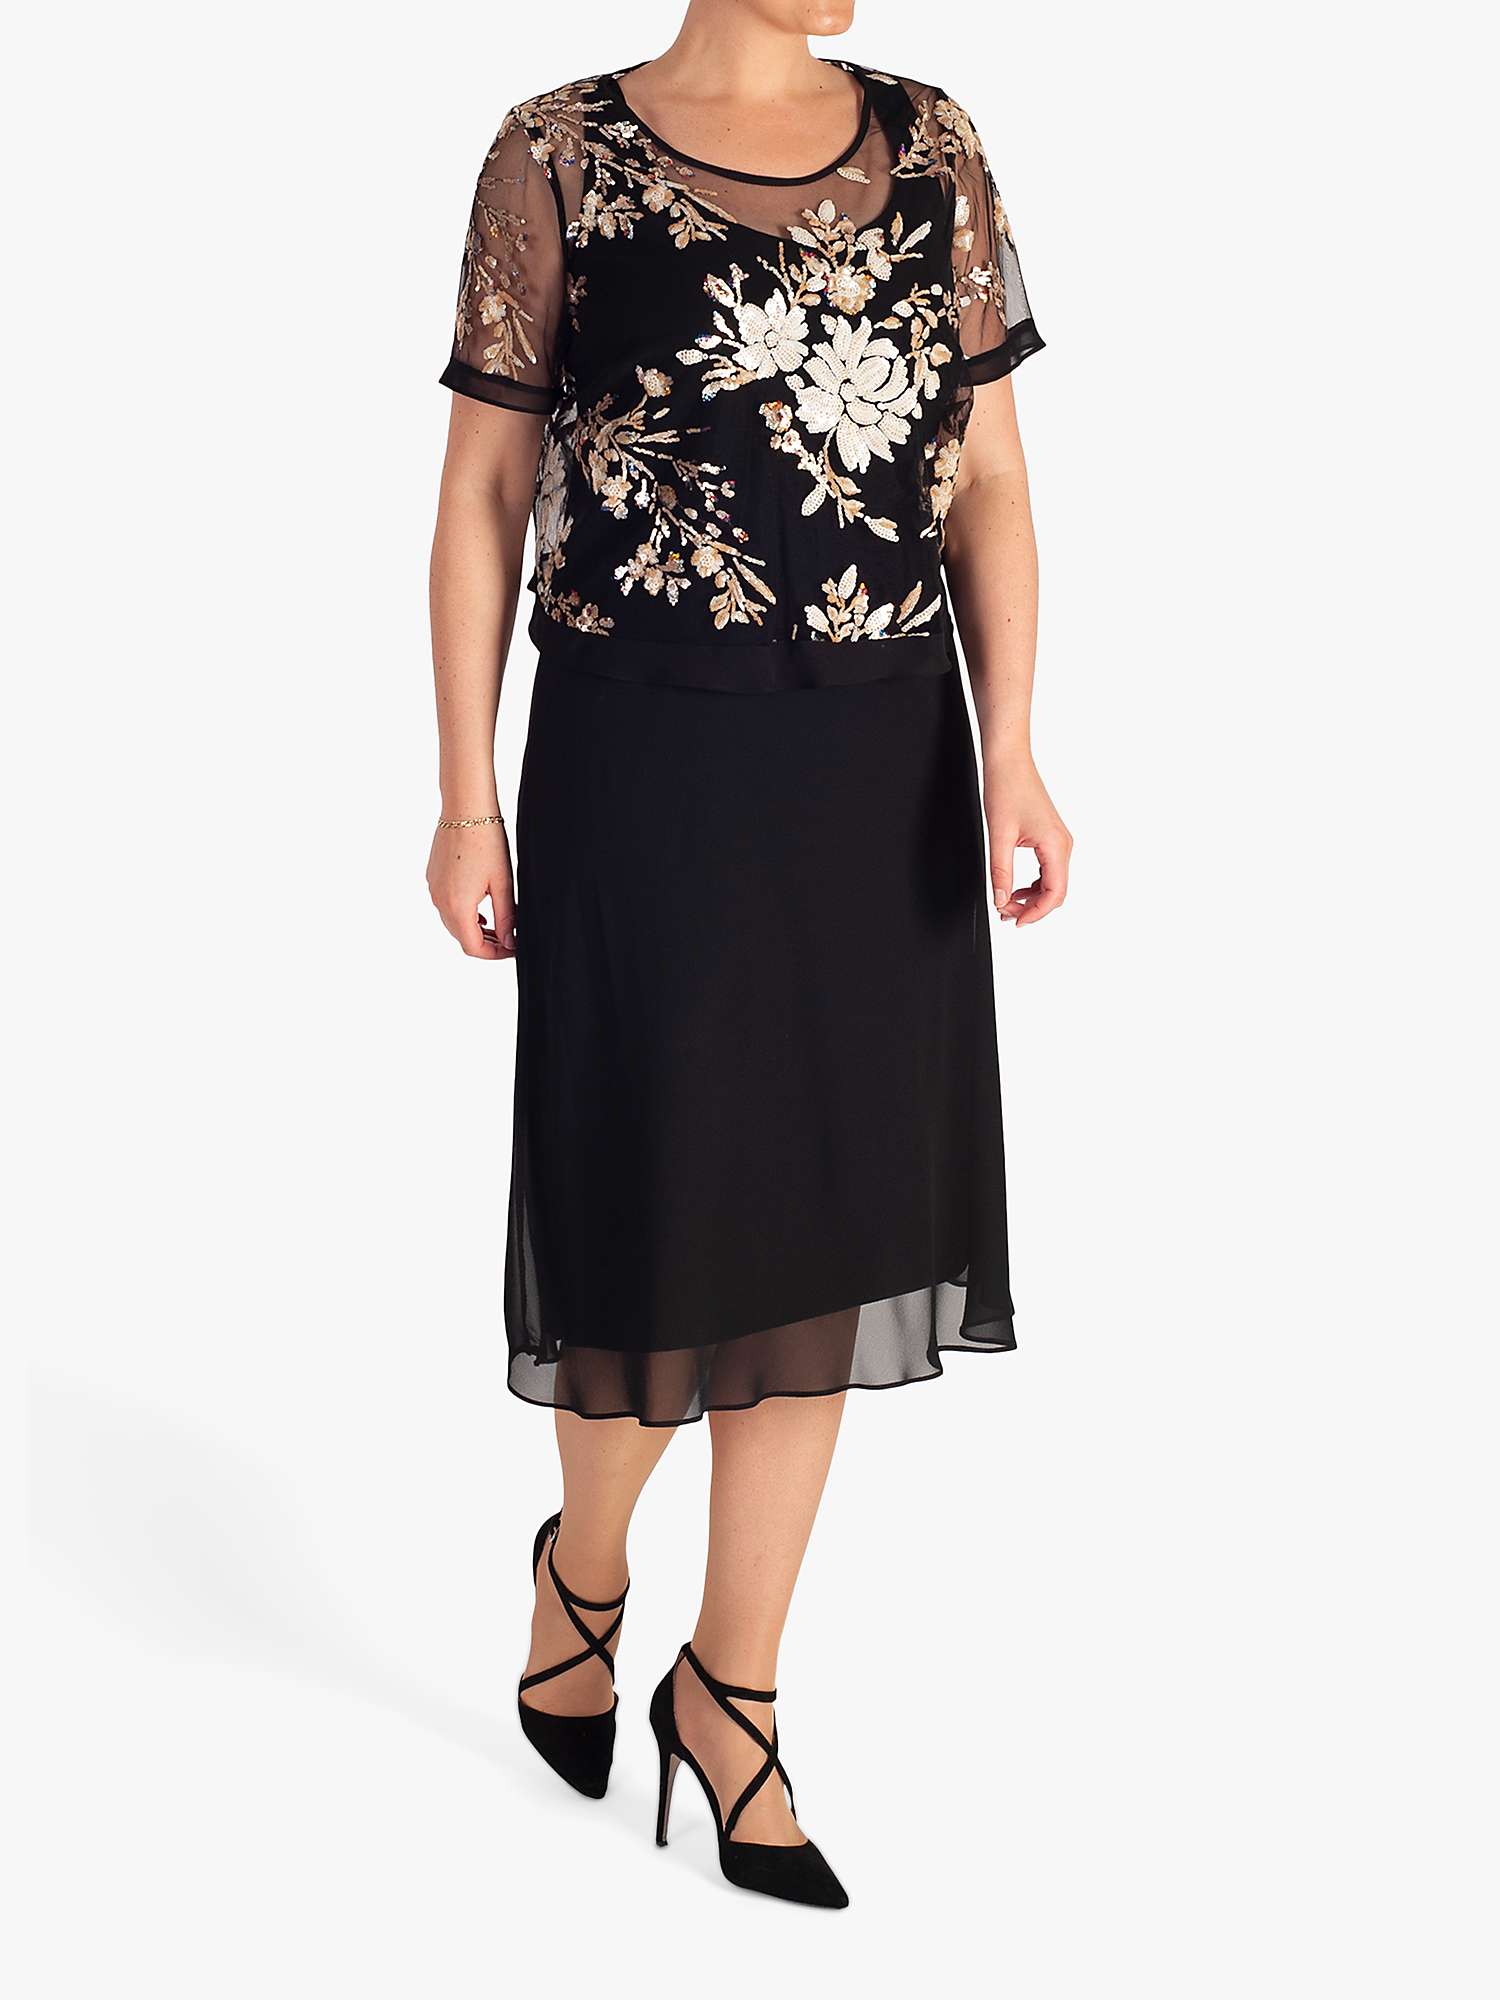 Buy chesca Embroidered Sequin Dress, Black/Gold Online at johnlewis.com